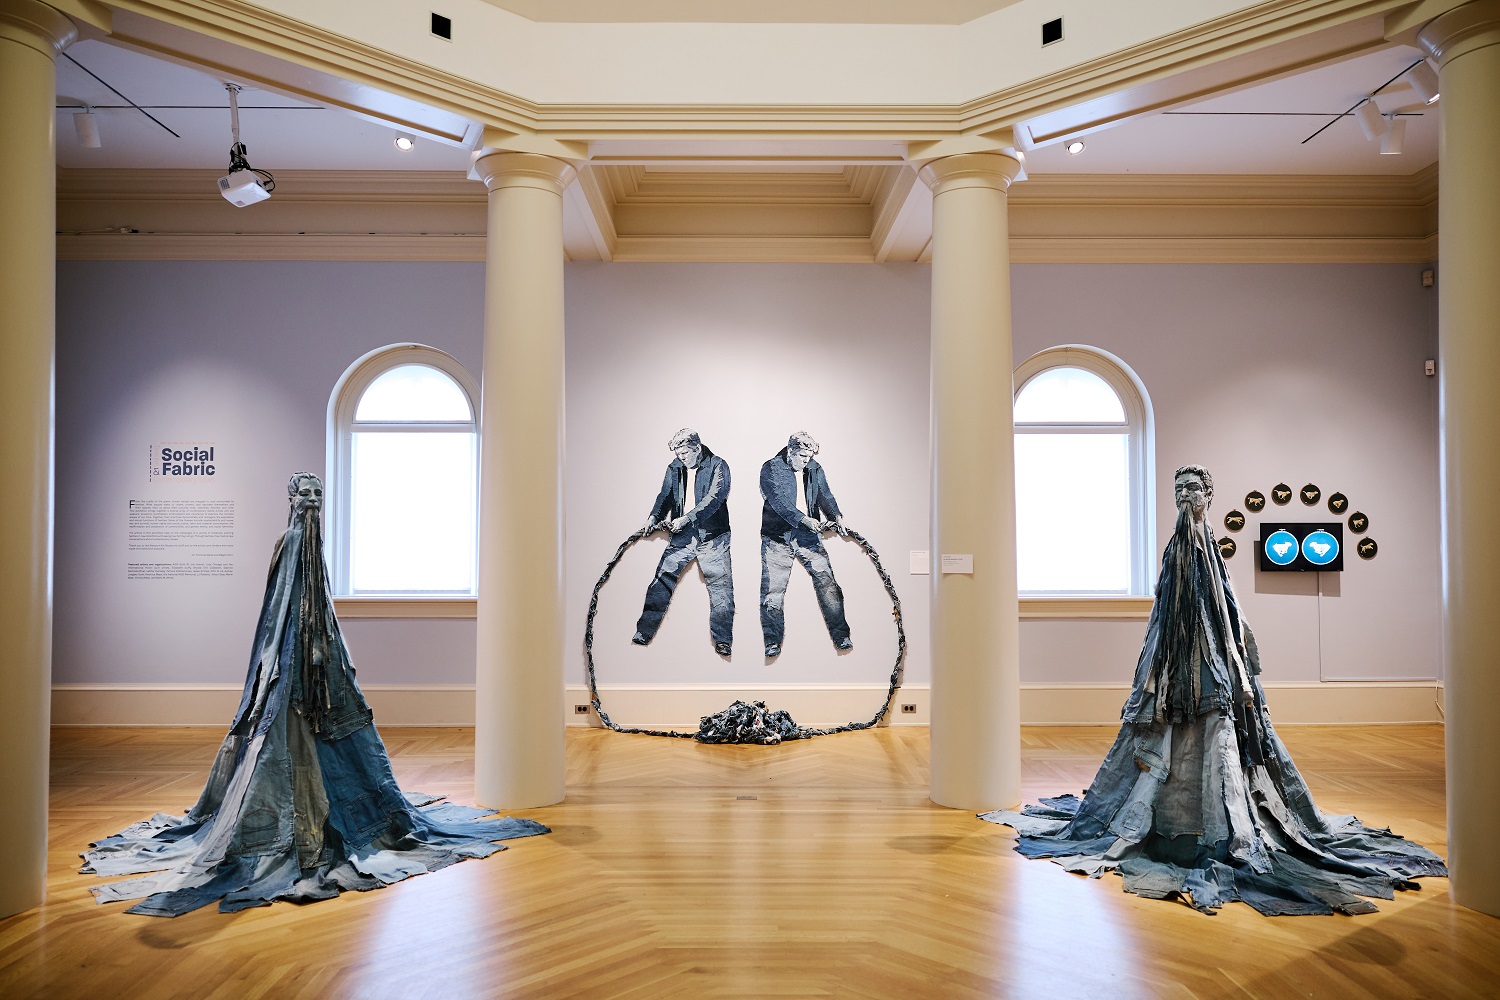 Installation view of Jim Arendt Eryks and Totemic Figures in “Social Fabric: Textiles and Contemporary Issues”